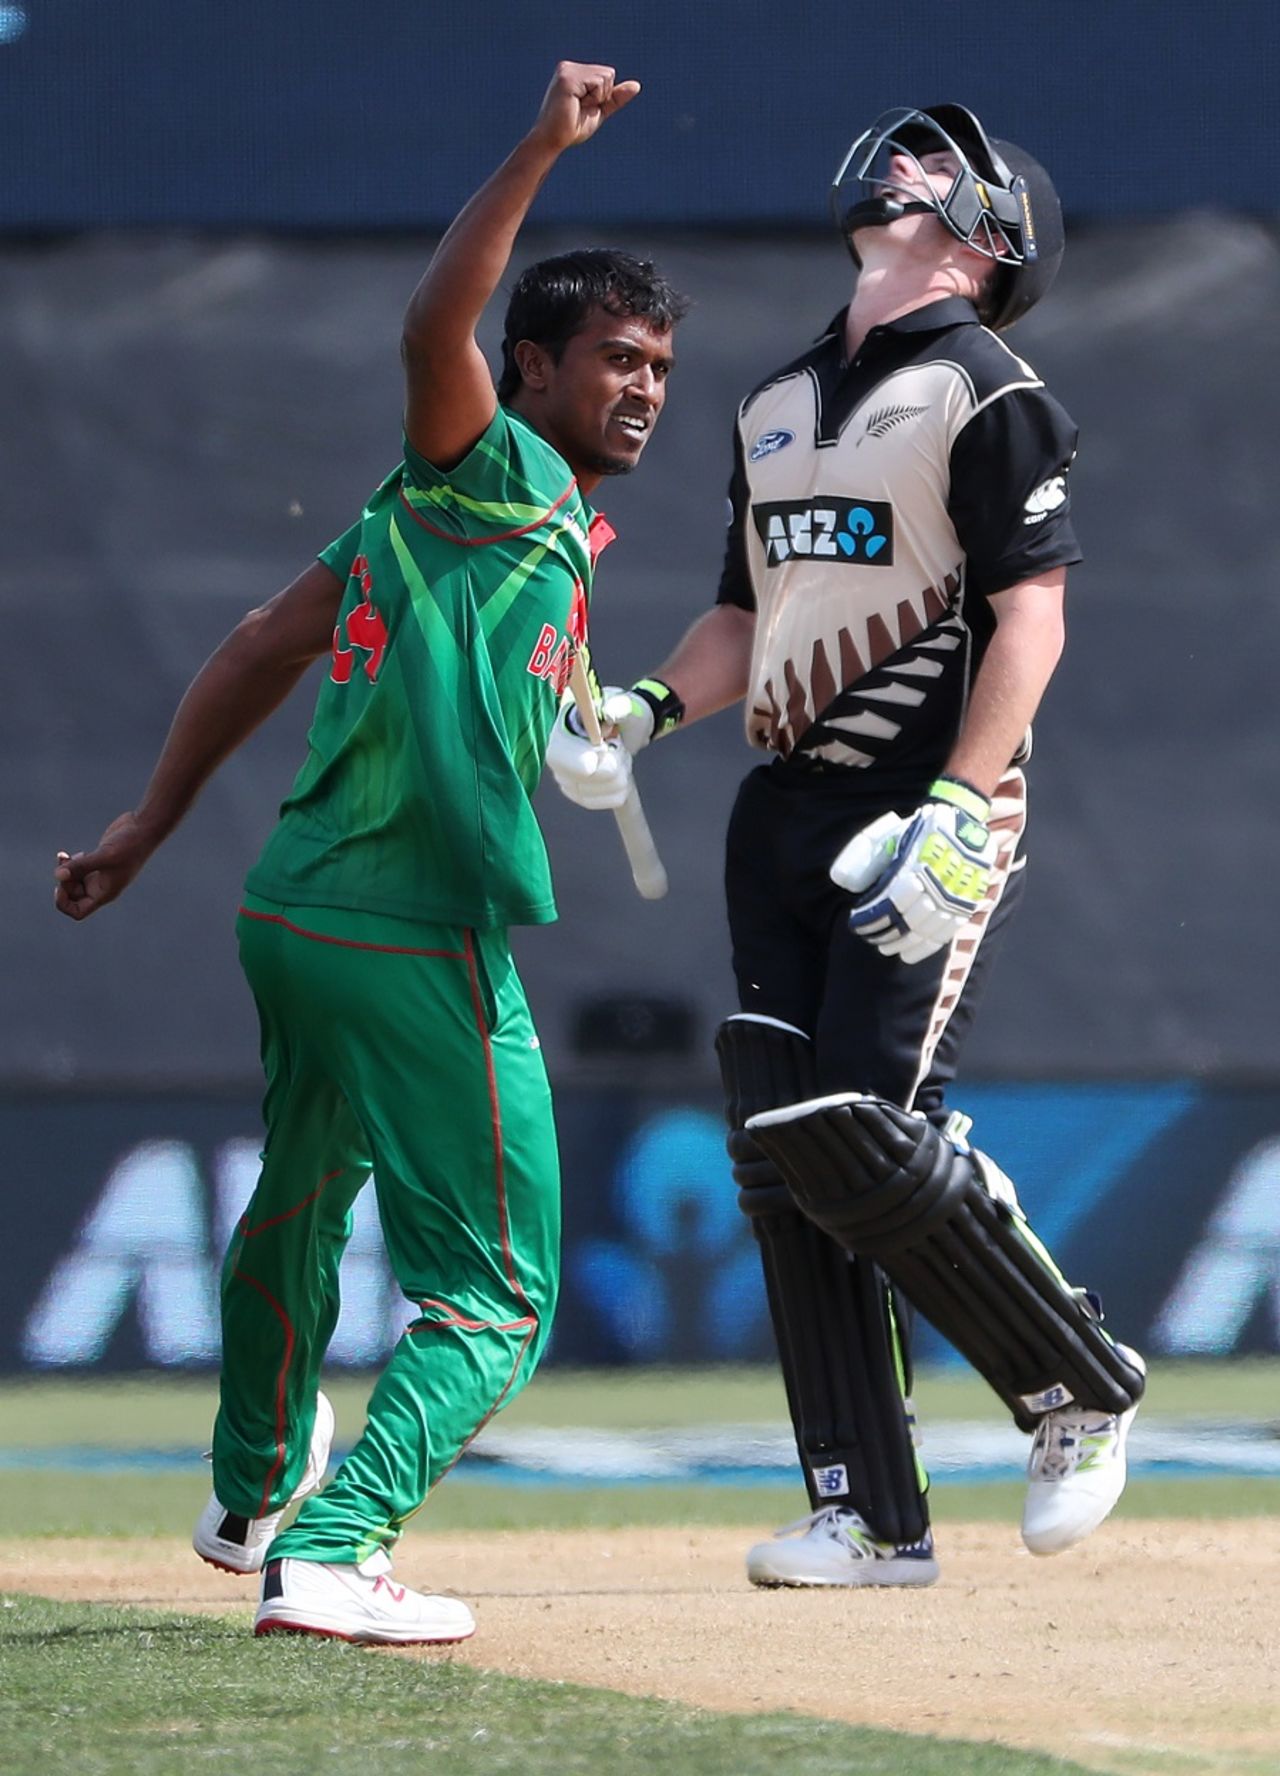 Relief and disappointment: Rubel Hossain and Colin Munro display contrasting emotions, New Zealand v Bangladesh, 2nd T20I, Mount Maunganui, January 6, 2017